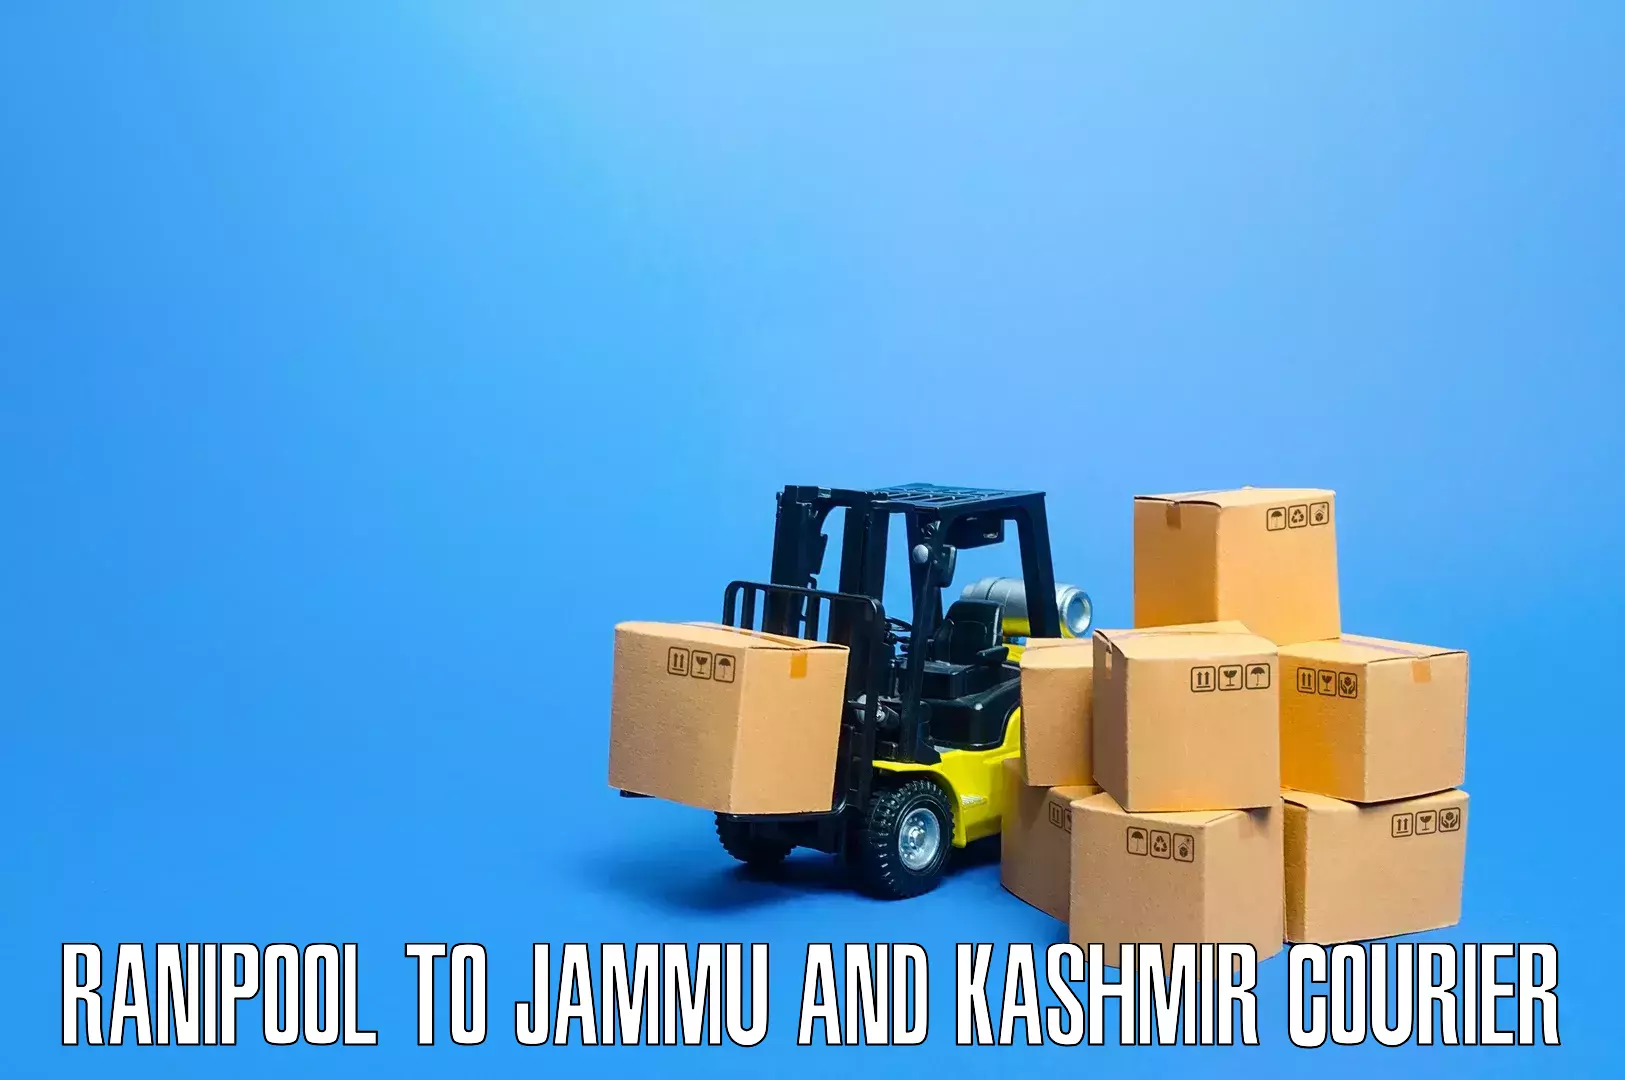 Expert furniture movers Ranipool to Jakh